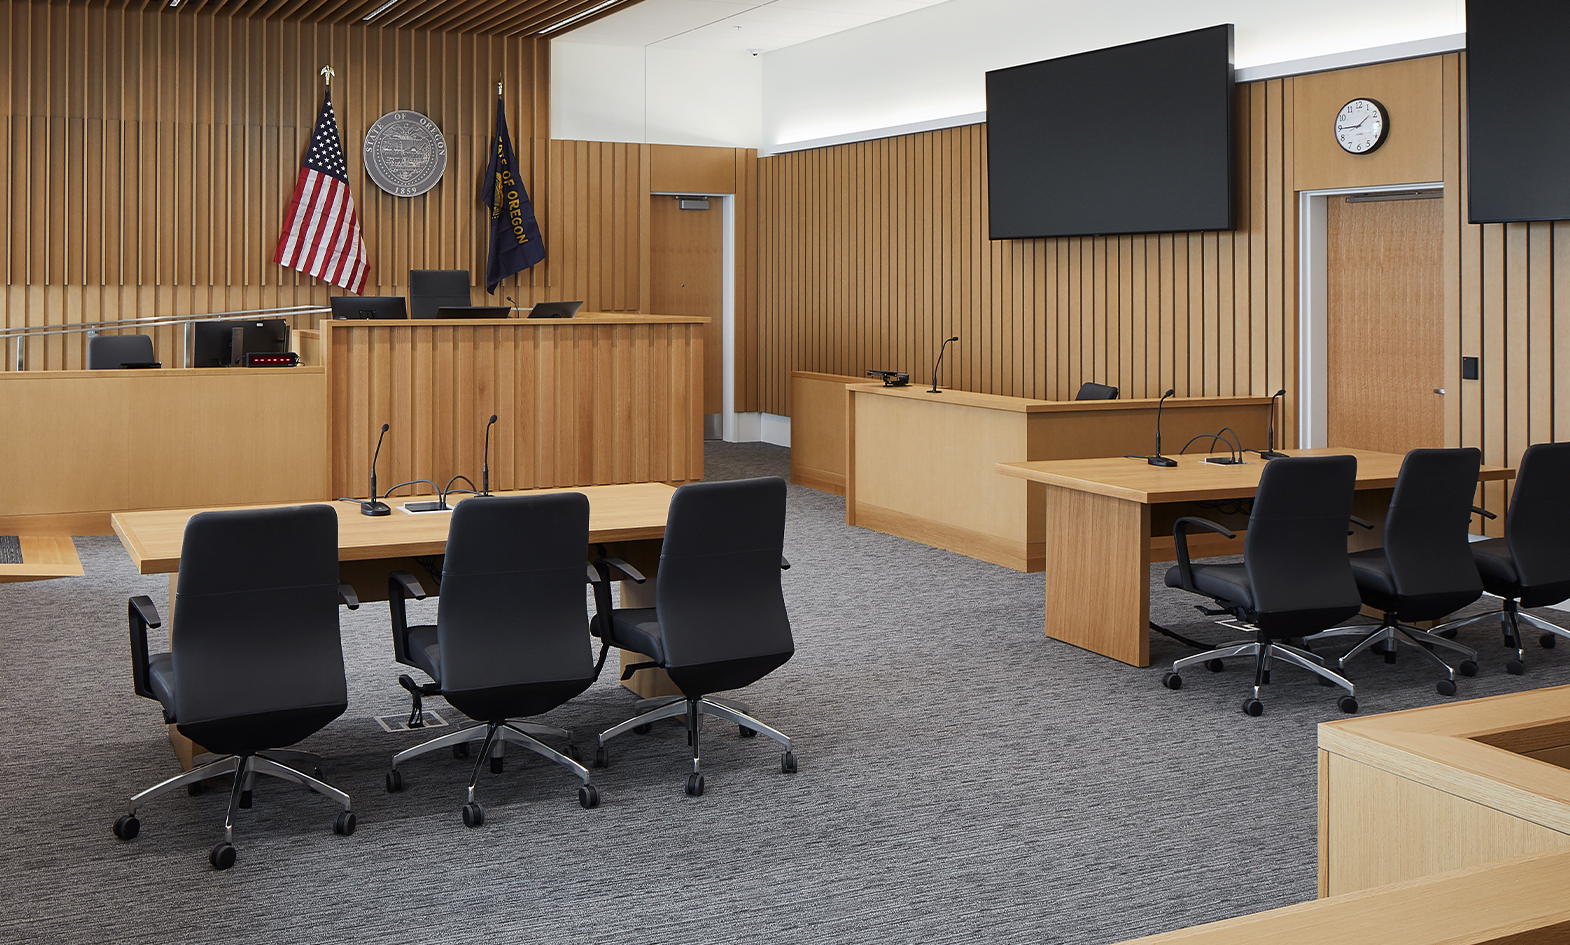 installation-image-multnomah-courtroom-tables-2-1570x945